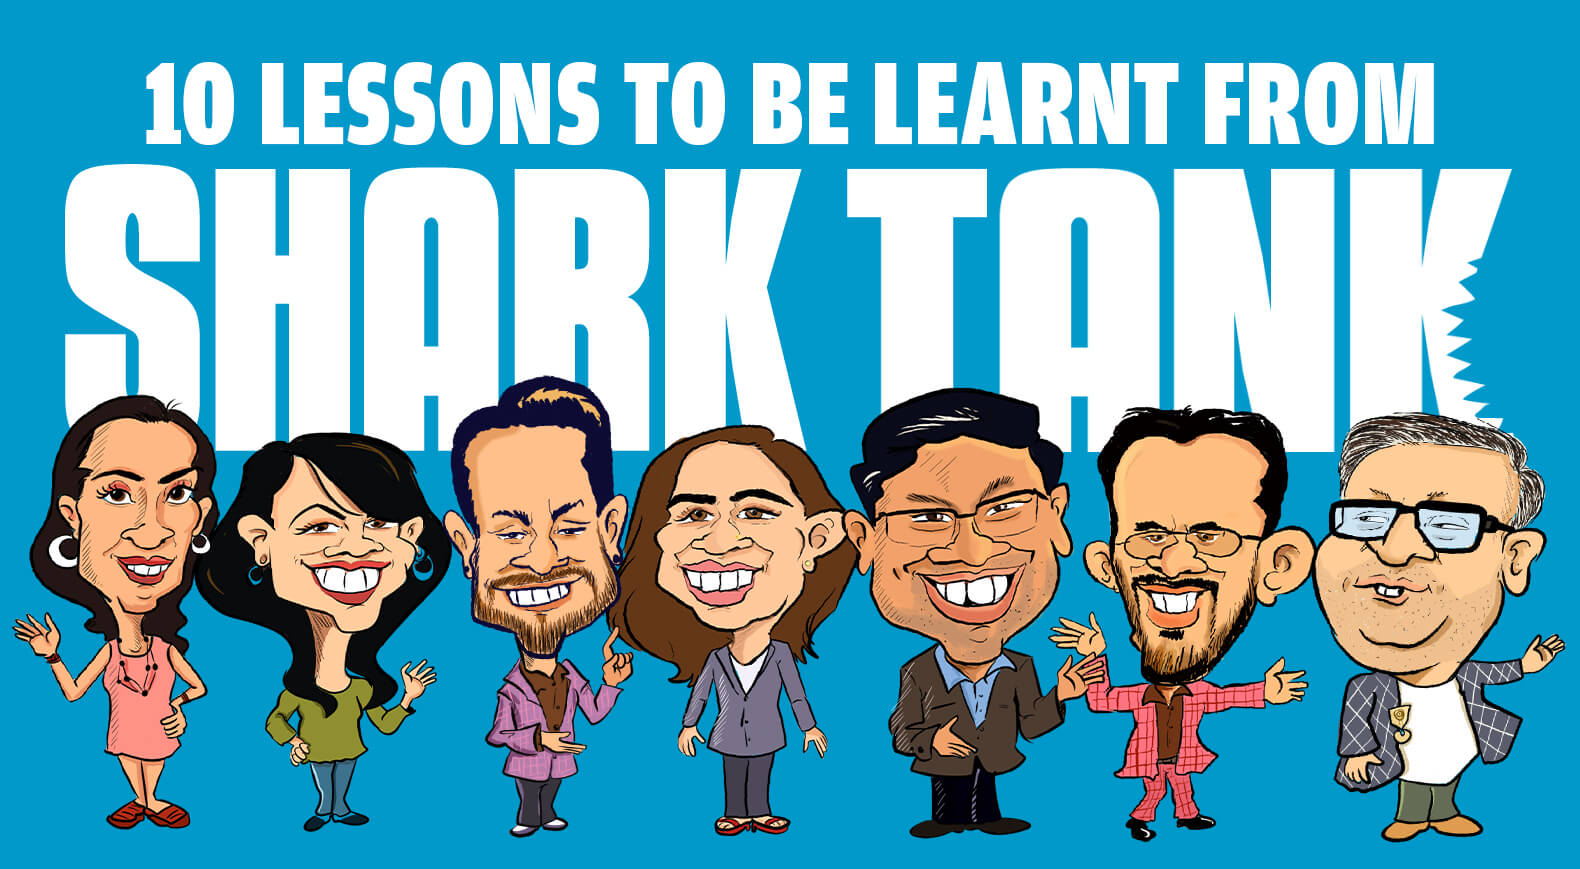 Successful Business Strategies to Learn from Shark Tank India